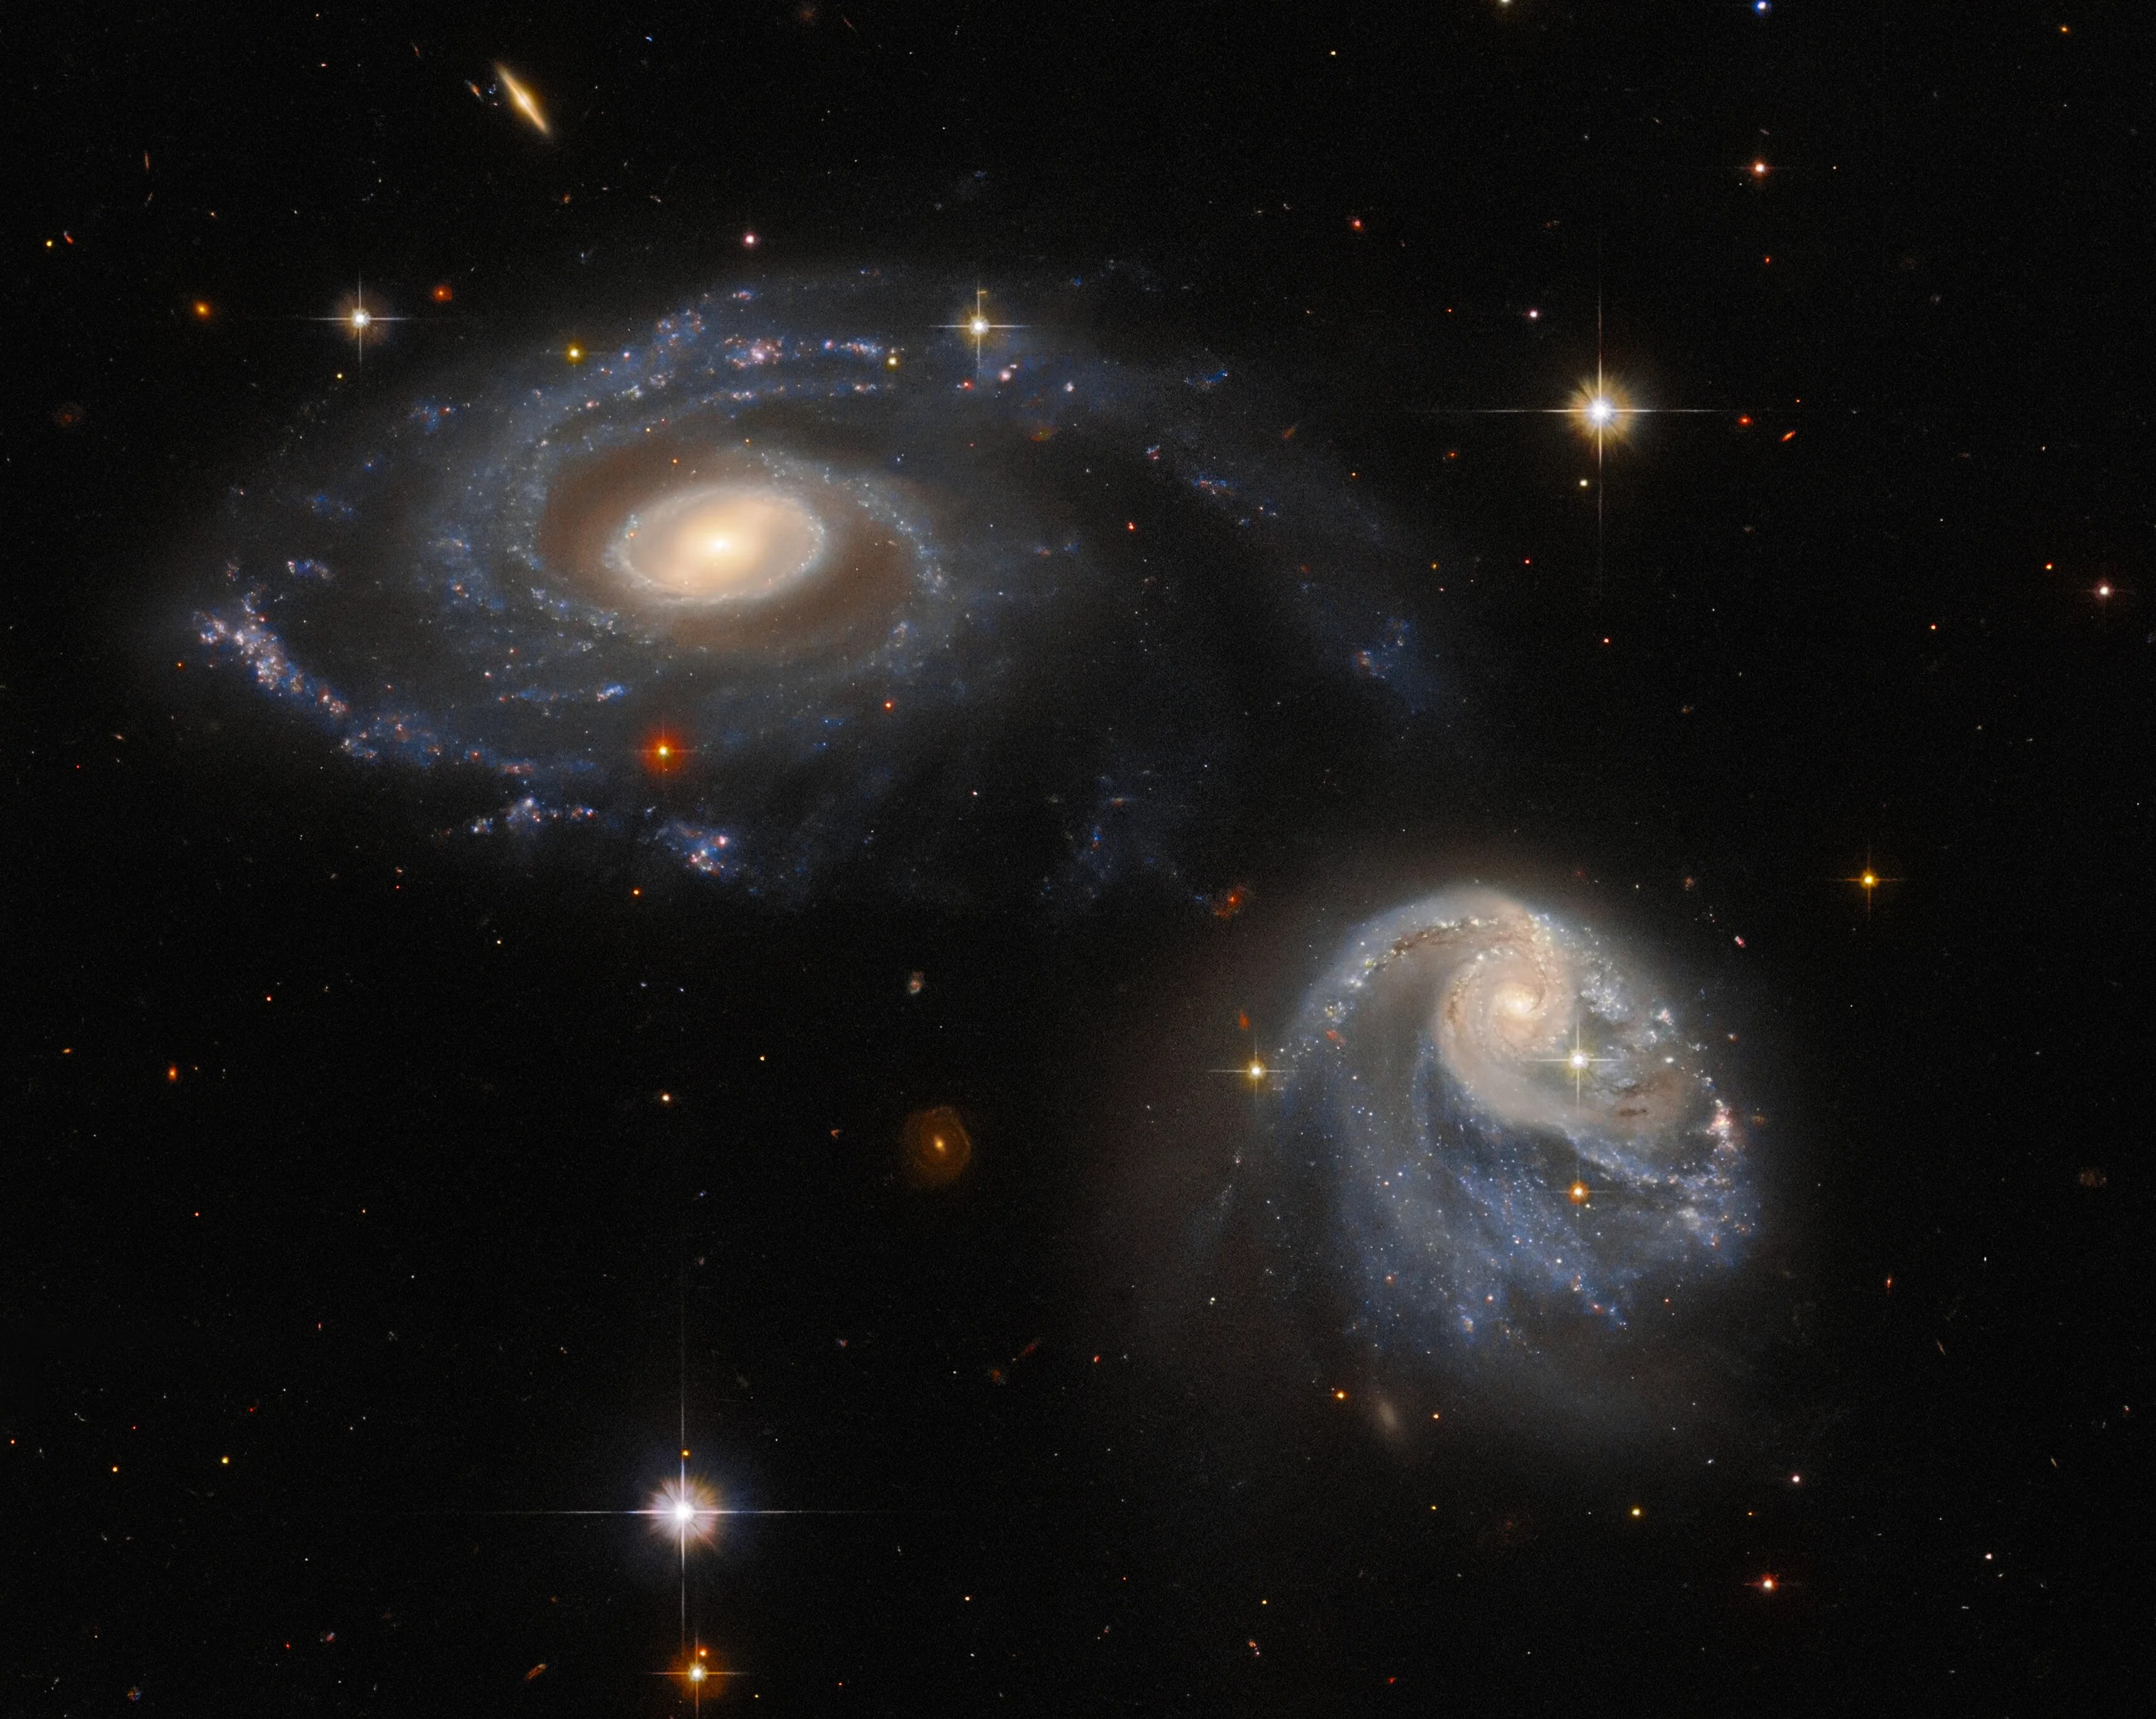 Two spiral galaxies, one at upper-left the other at lower-right, both are nearly face-on providing views of their spiral arms, background stars and galaxies